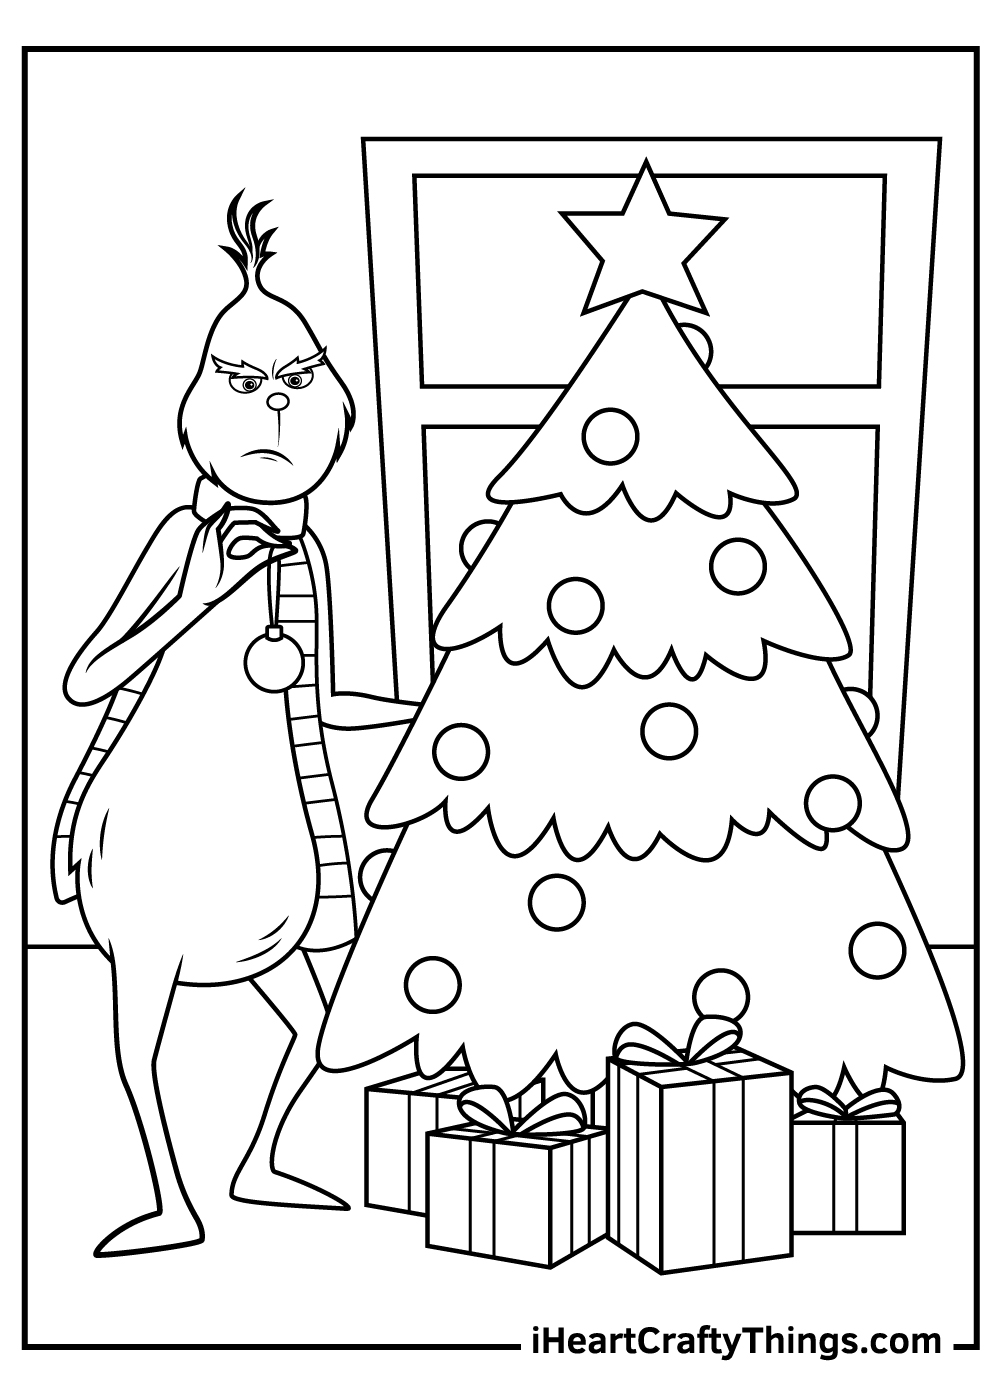 printable-coloring-pages-grinch